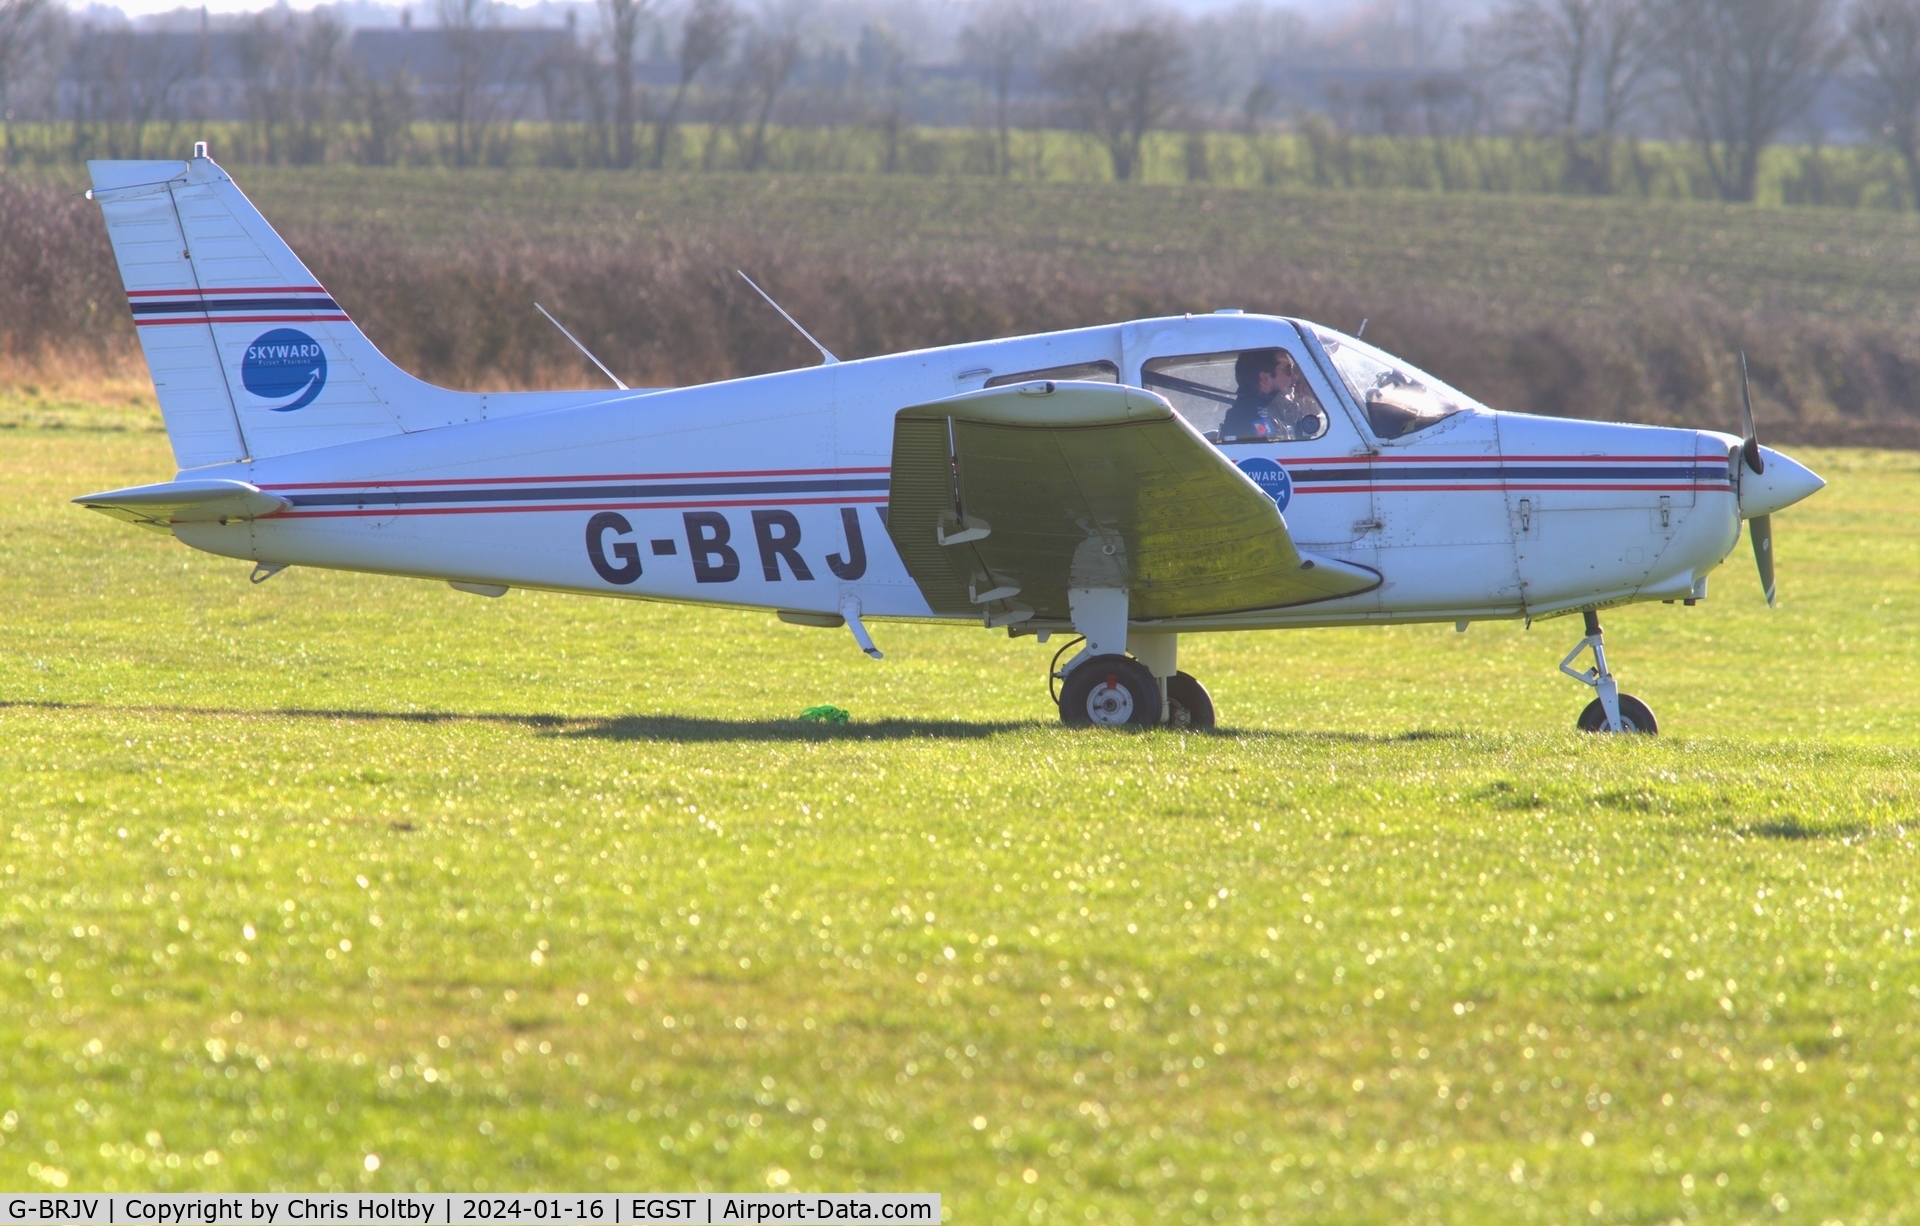 G-BRJV, 1988 Piper PA-28-161 Cadet C/N 28-41167, Taxiing for take-off at Elmsett, Airfield.